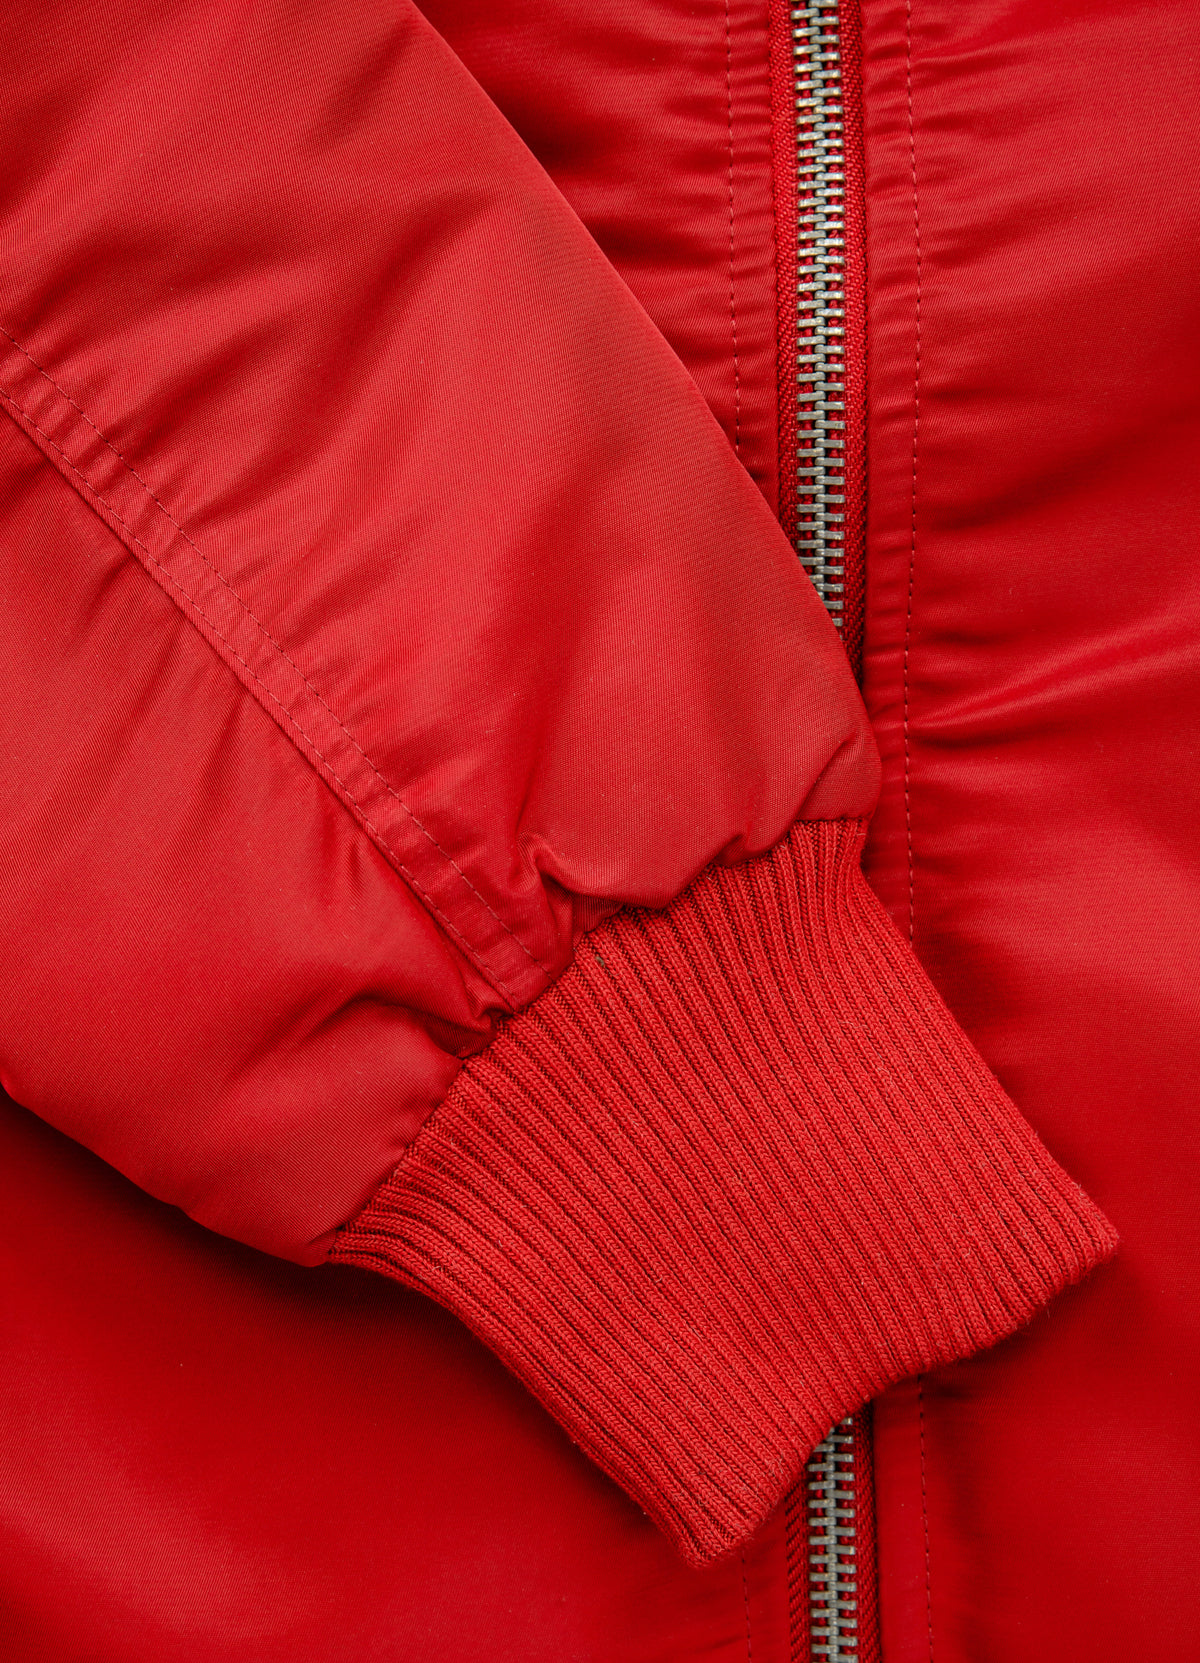 MA1 Red Padded Jacket.